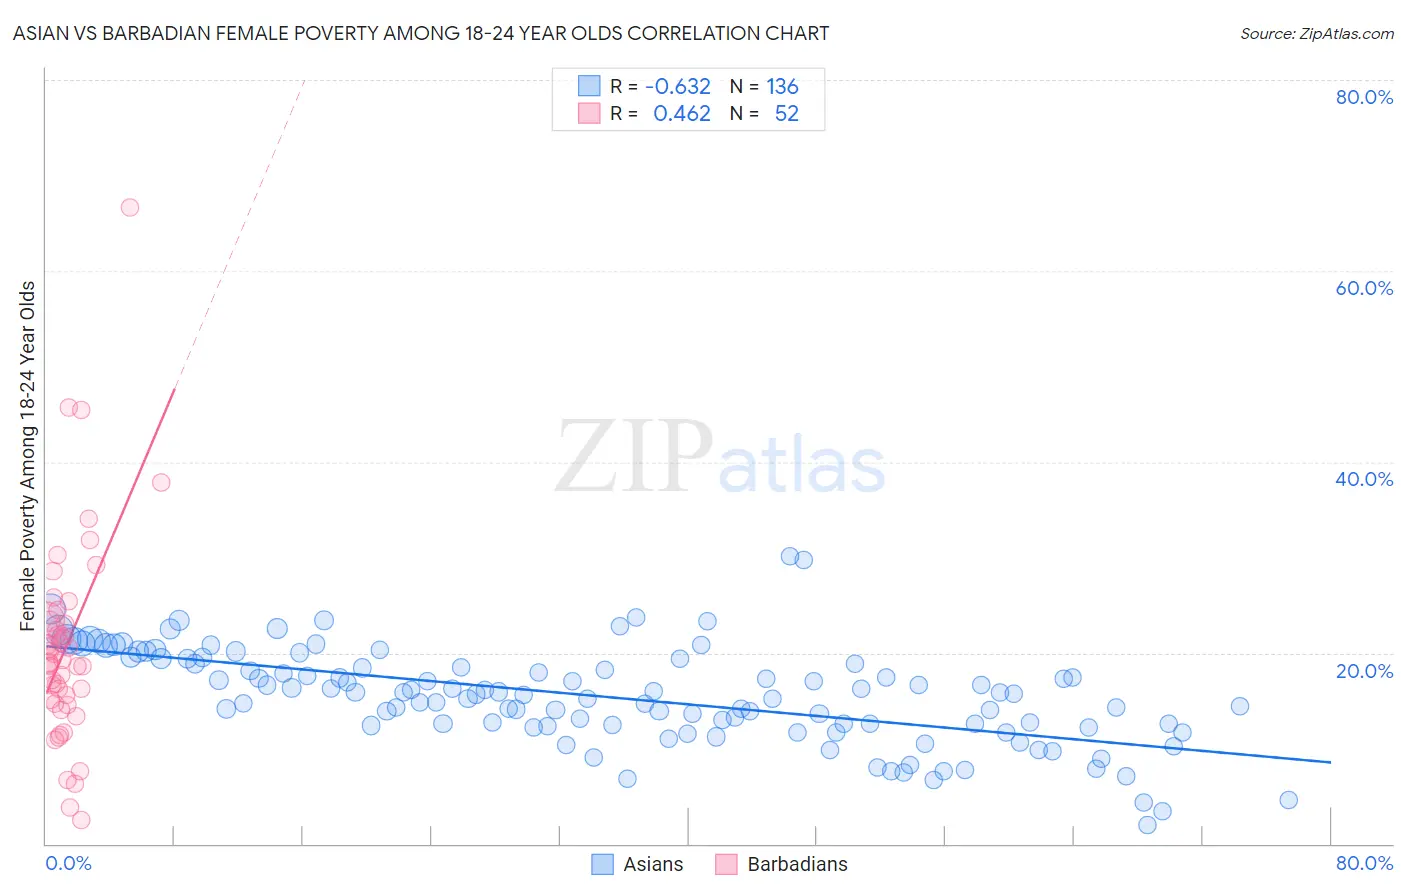 Asian vs Barbadian Female Poverty Among 18-24 Year Olds